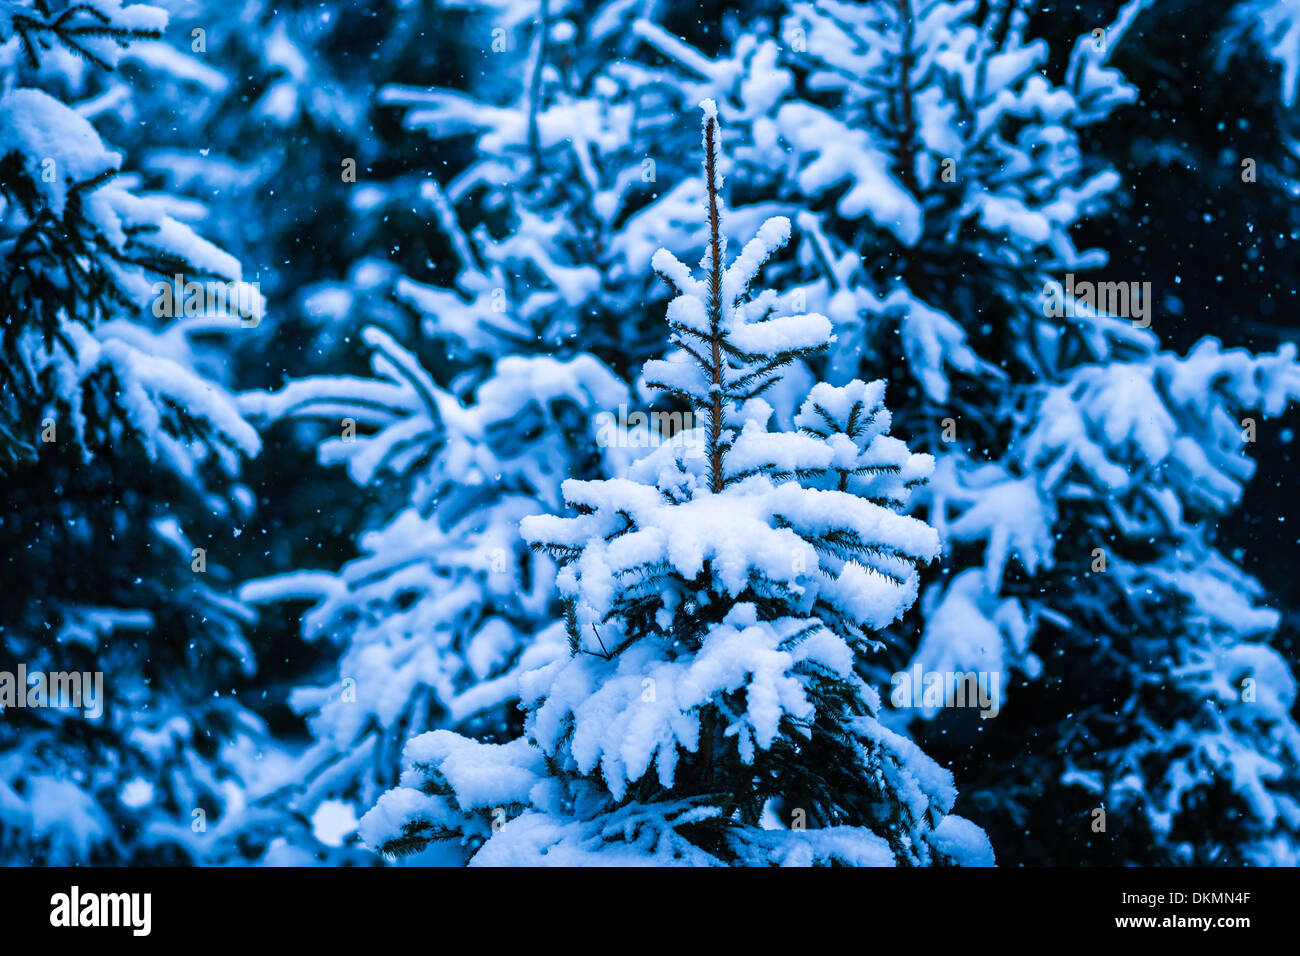 Winter Snow Christmas Tree 12. Fresh snow covered spruce trees in the forest in snowstorm. Dark green, blue and white colors. Stock Photo